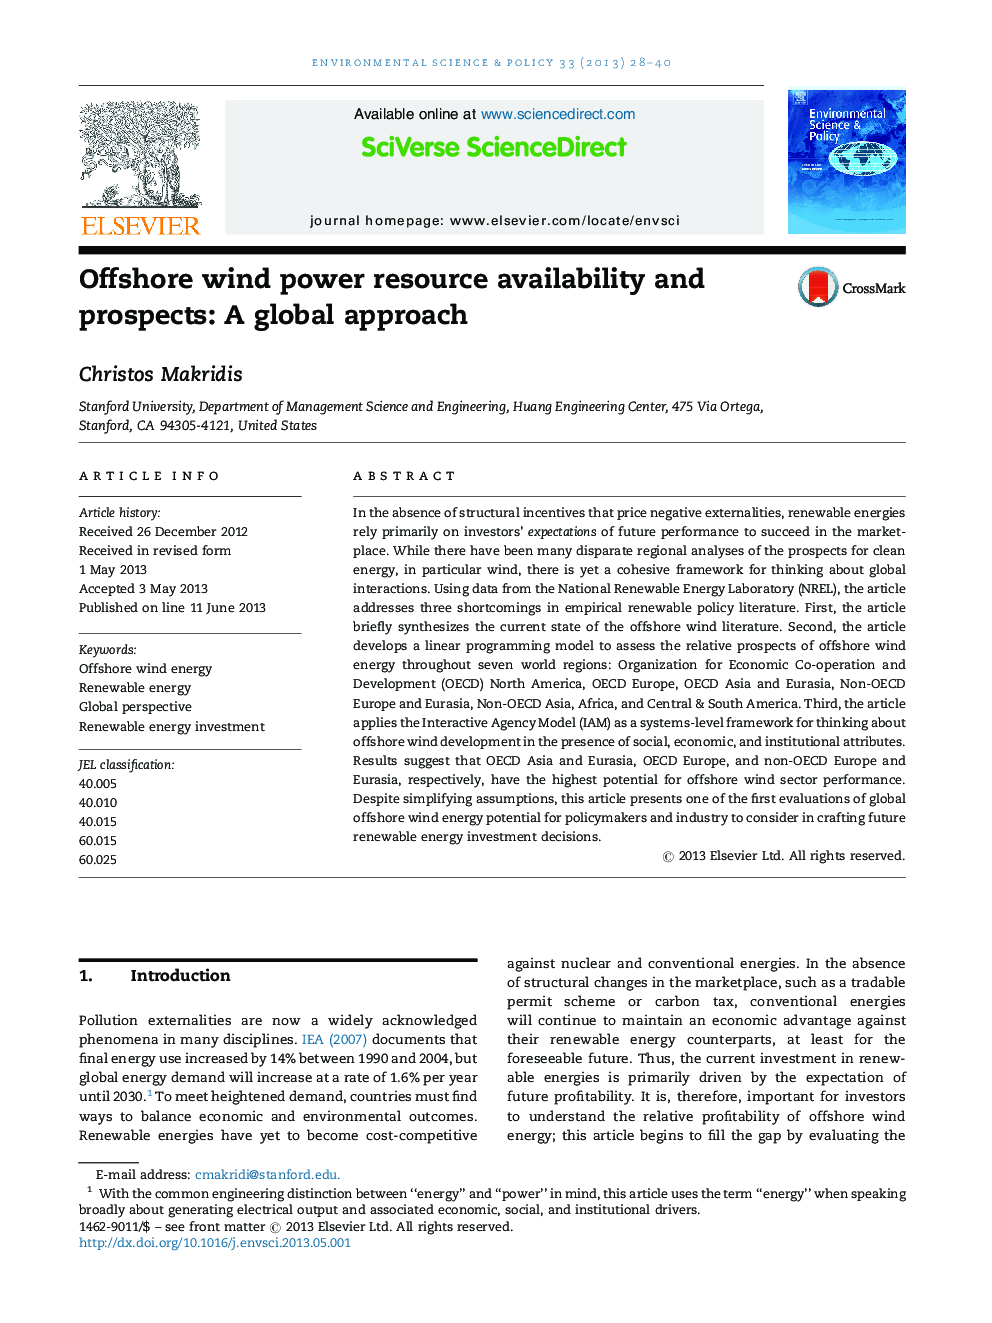 Offshore wind power resource availability and prospects: A global approach